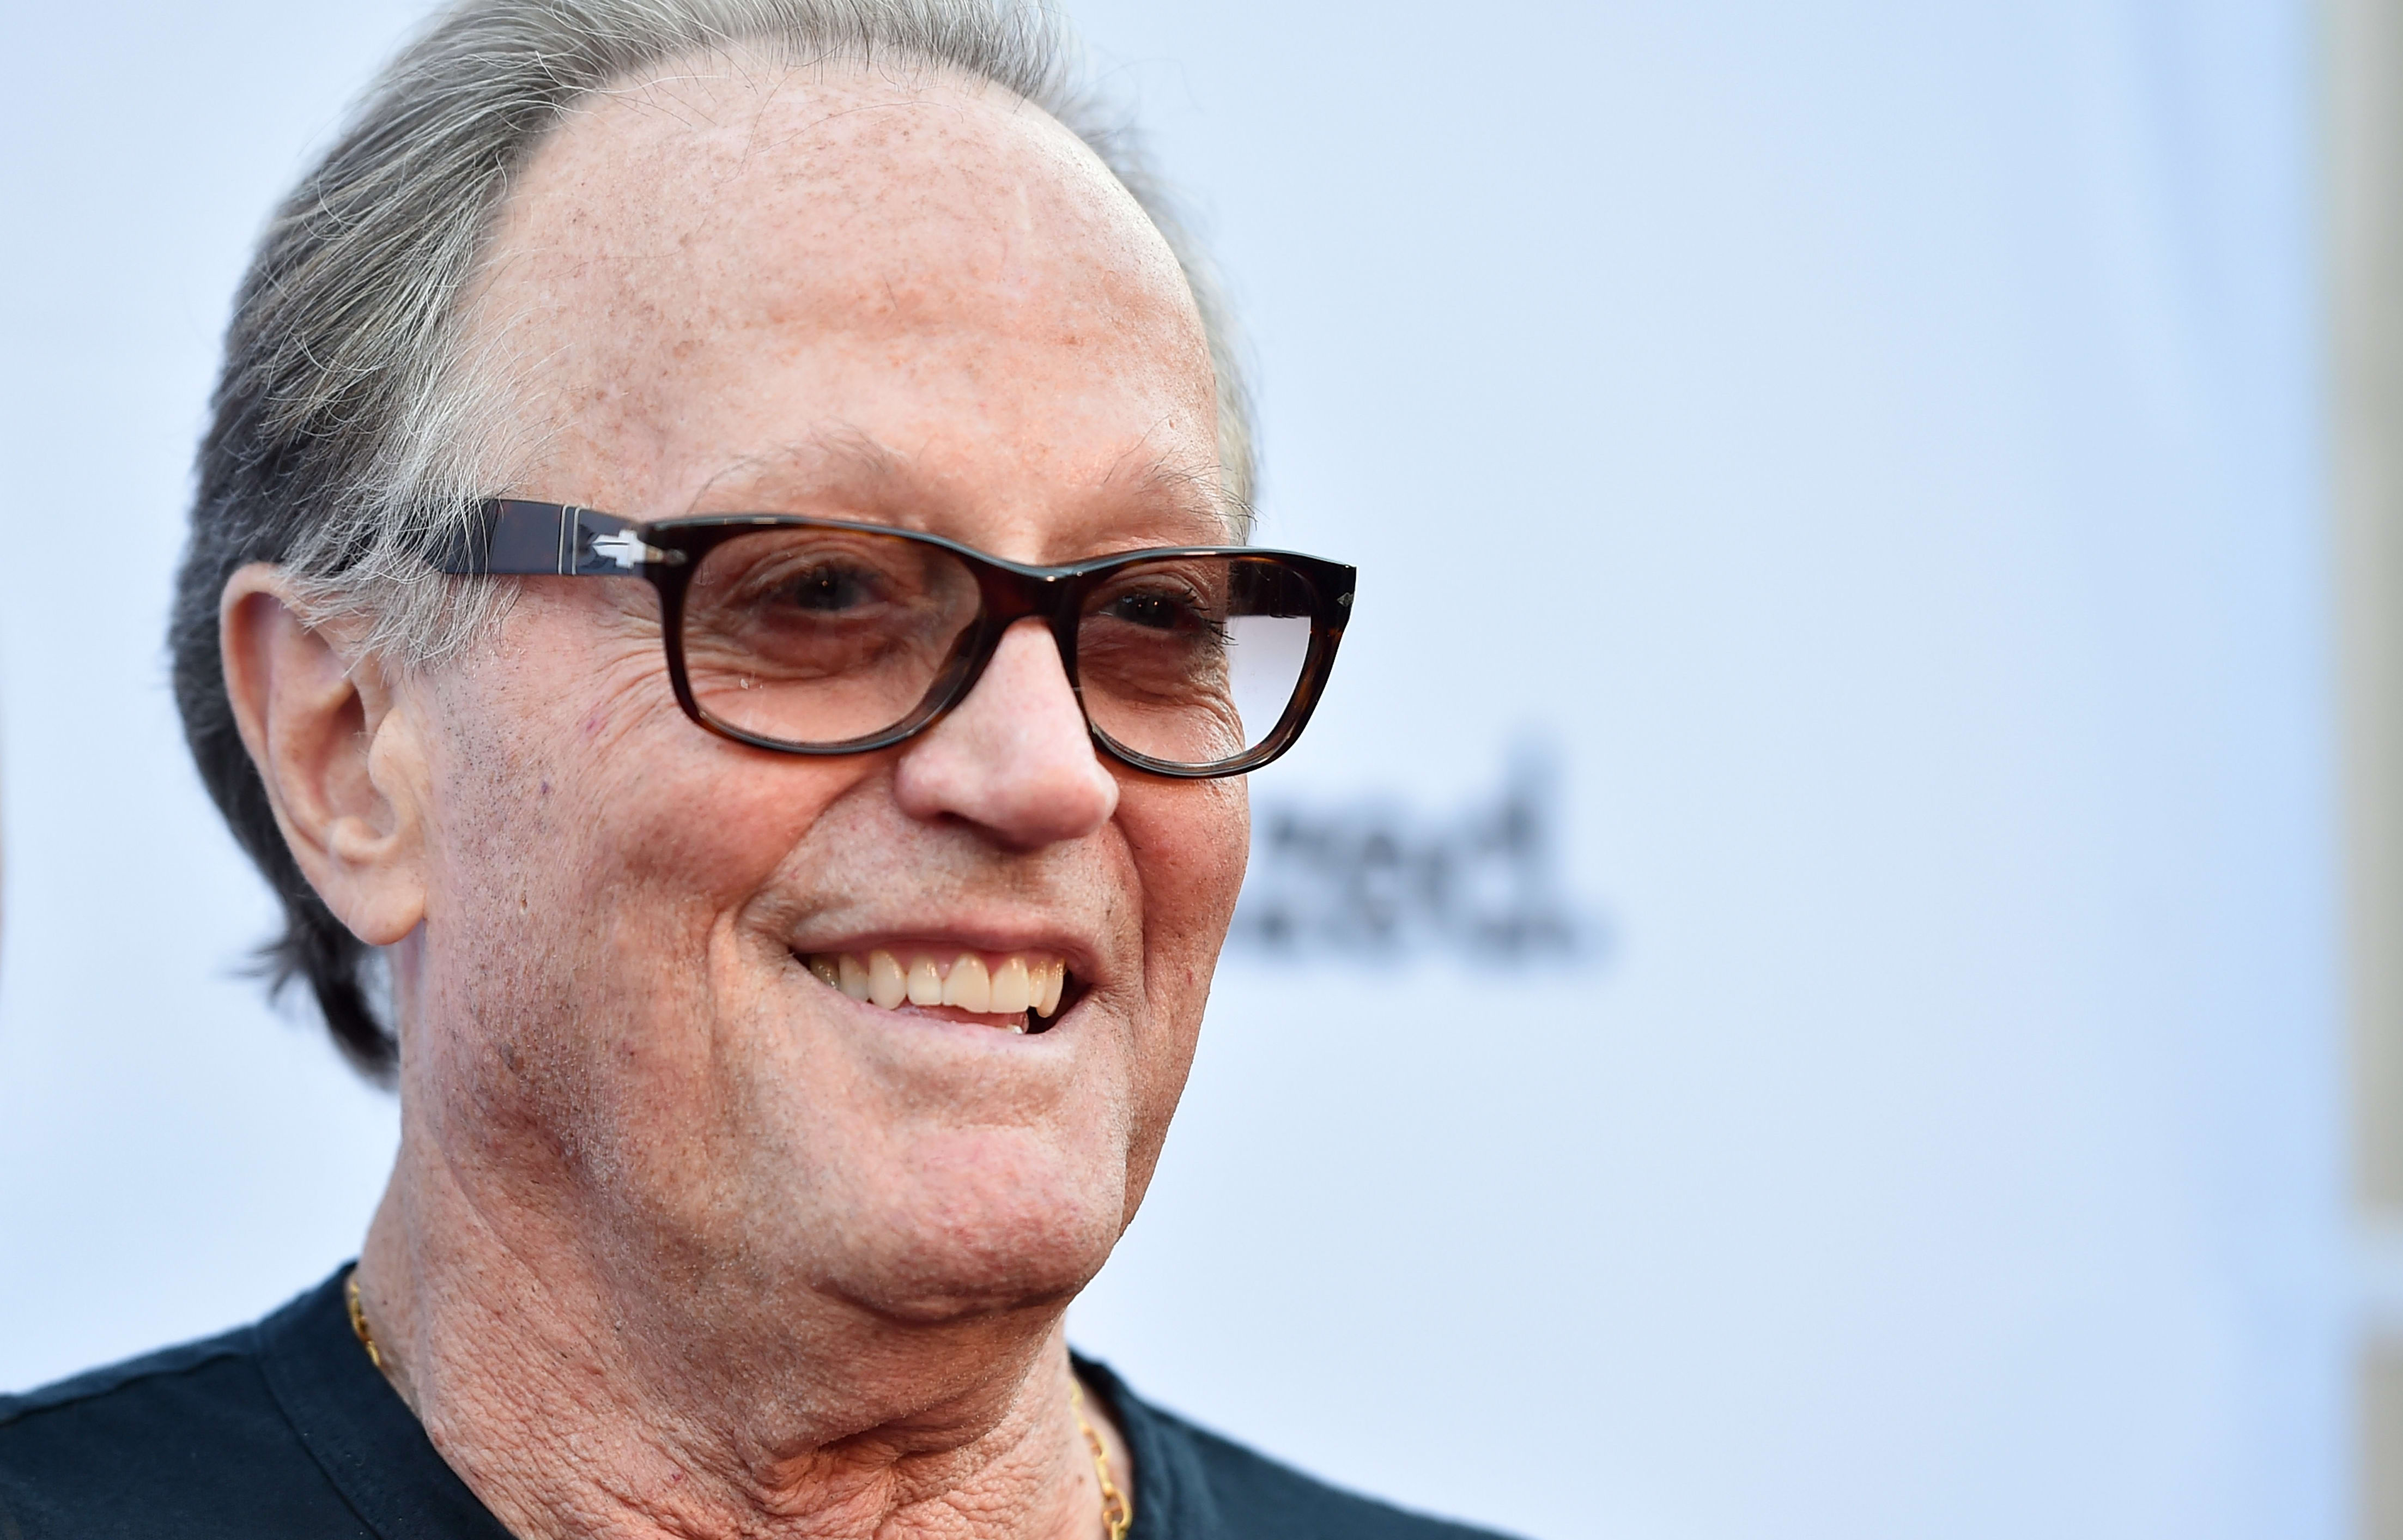 Actor Peter Fonda pictured in 2018 attending a Hollywood movie premier.